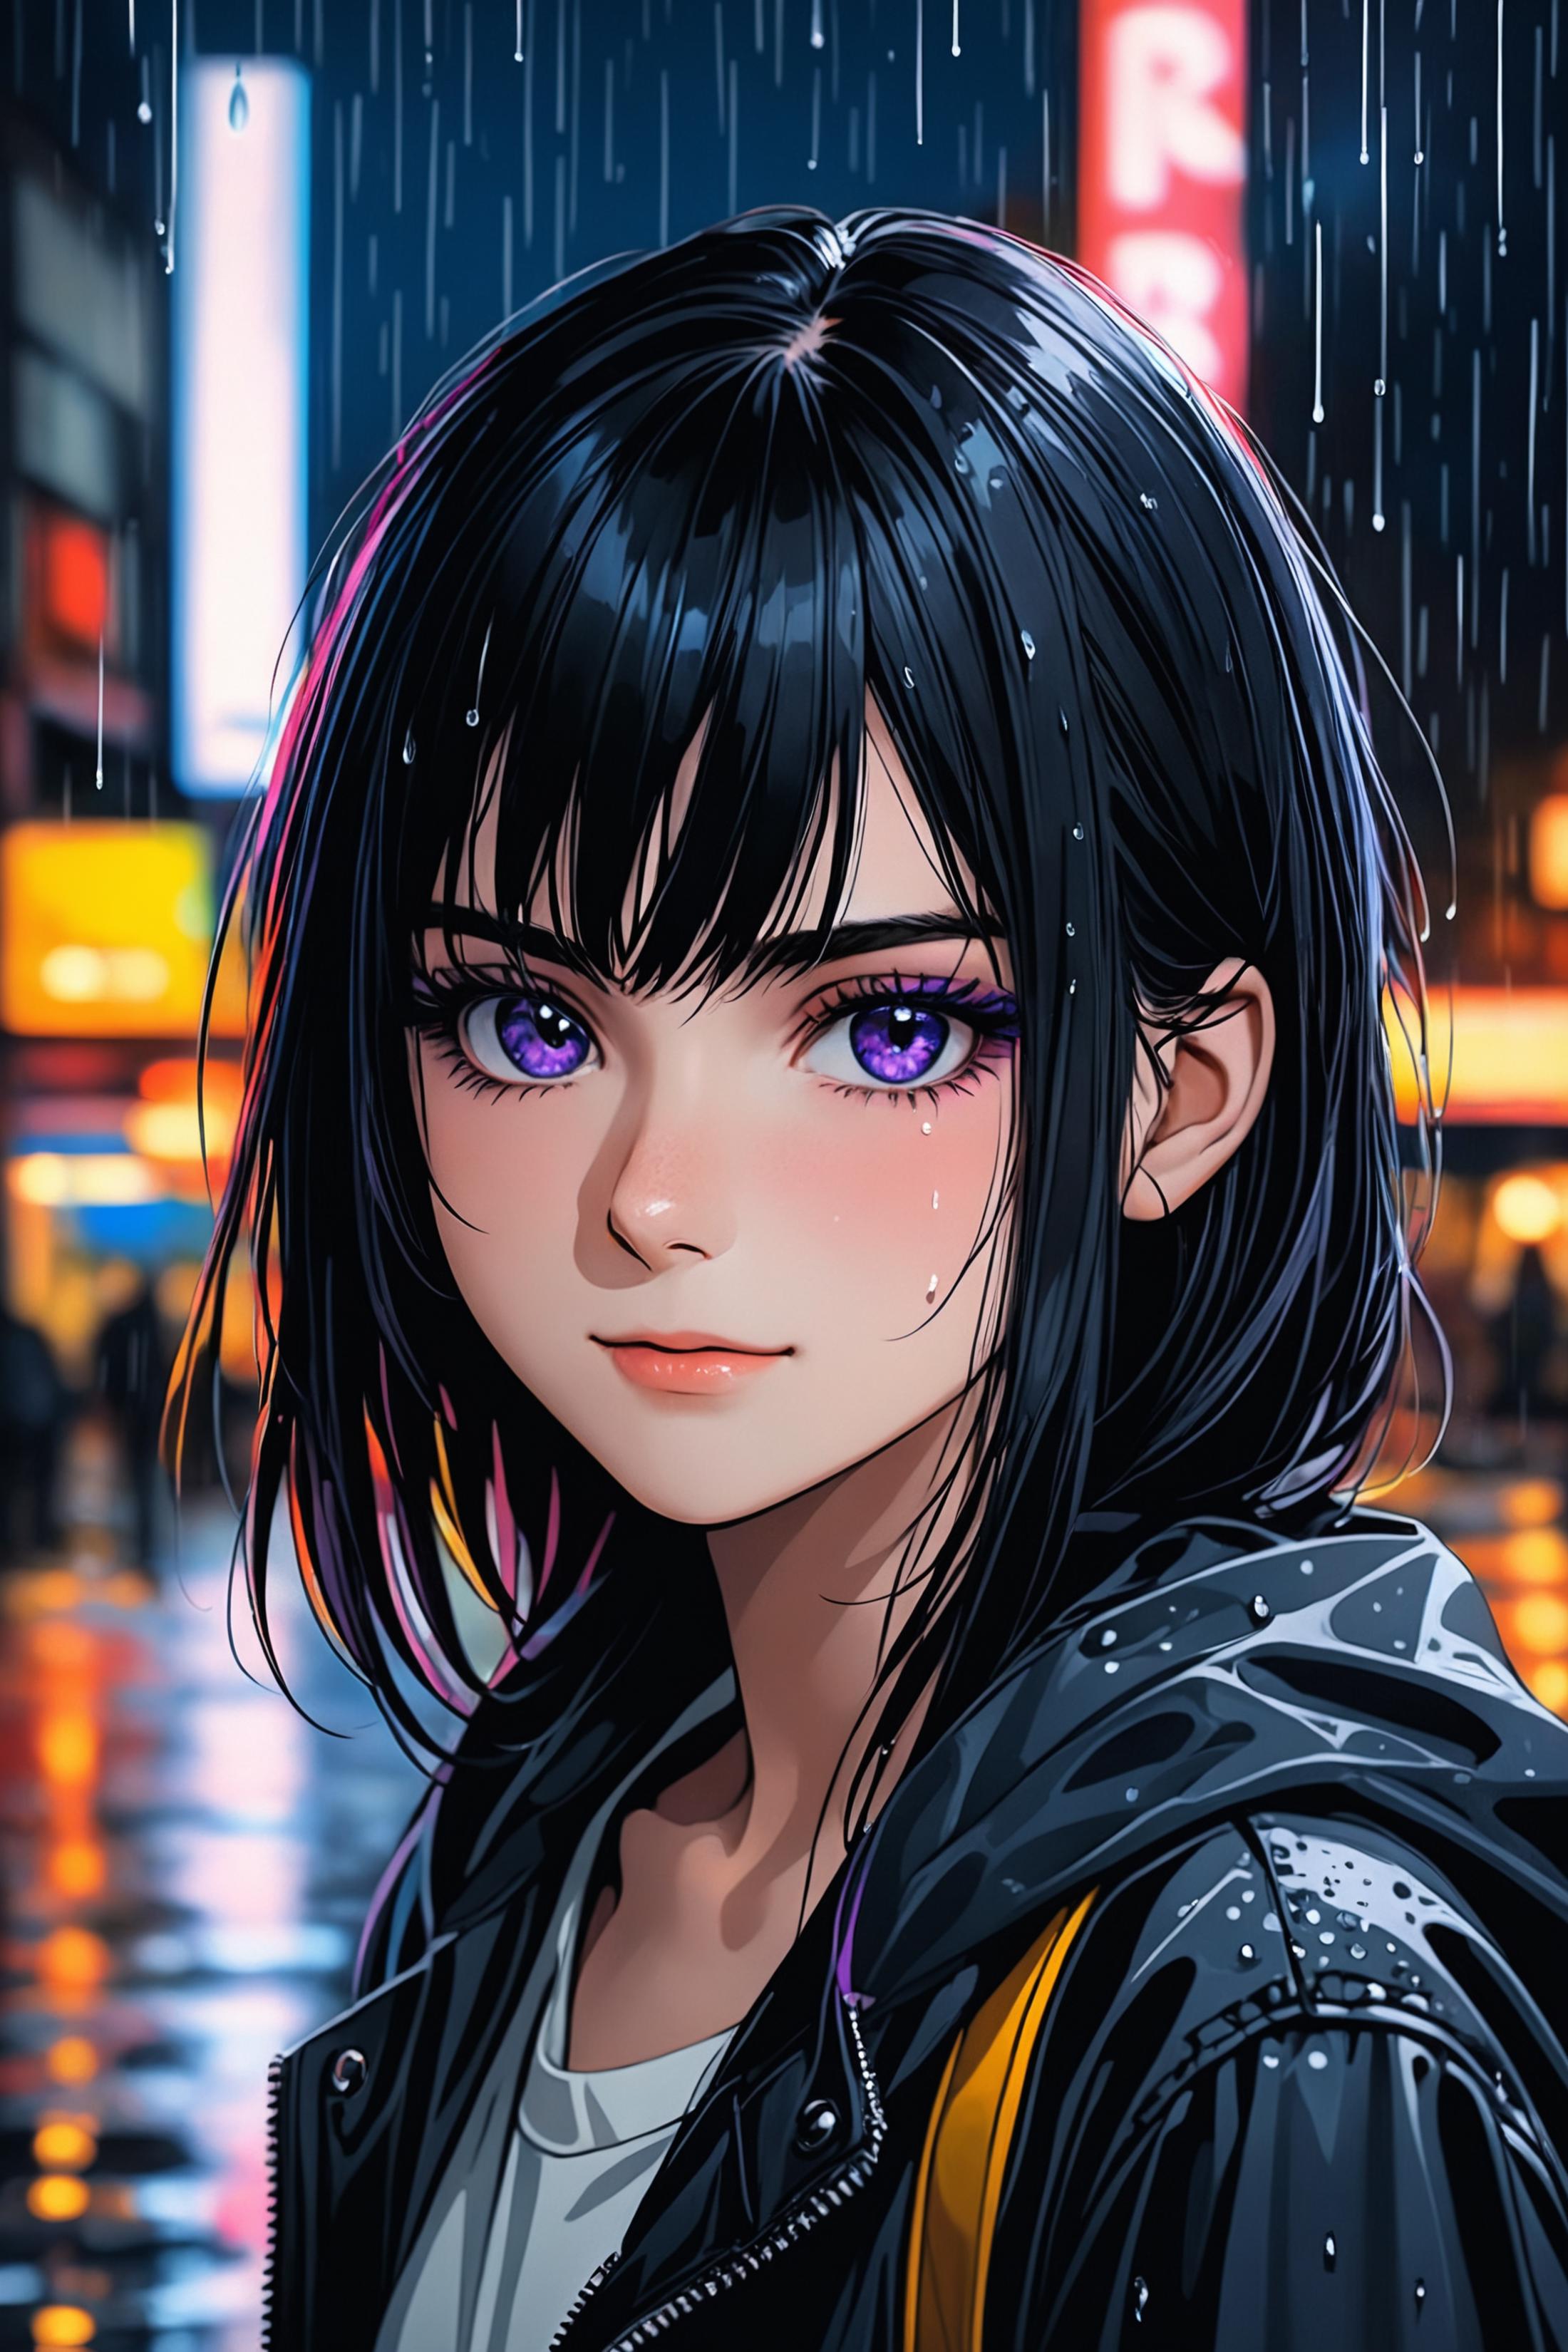 Anime Girl with Purple Eyes and Black Hair Wearing a Black Raincoat